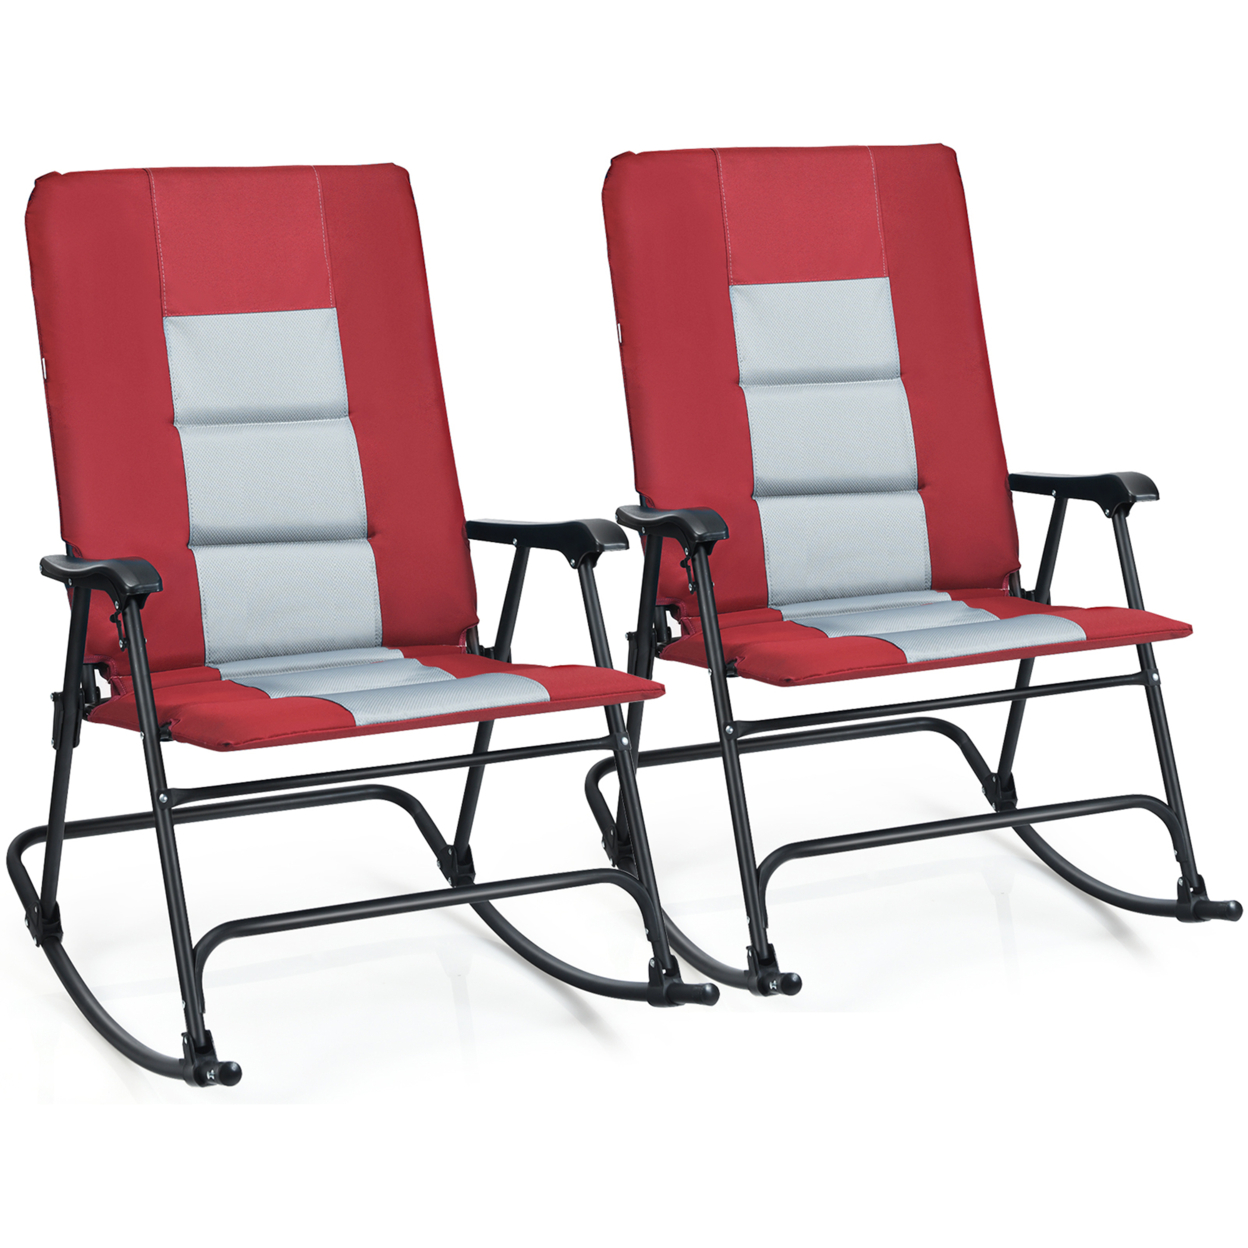 Gymax Set Of 2 Padded Folding Rocking Chairs Patio Garden Yard Camping Red/Blue - Red